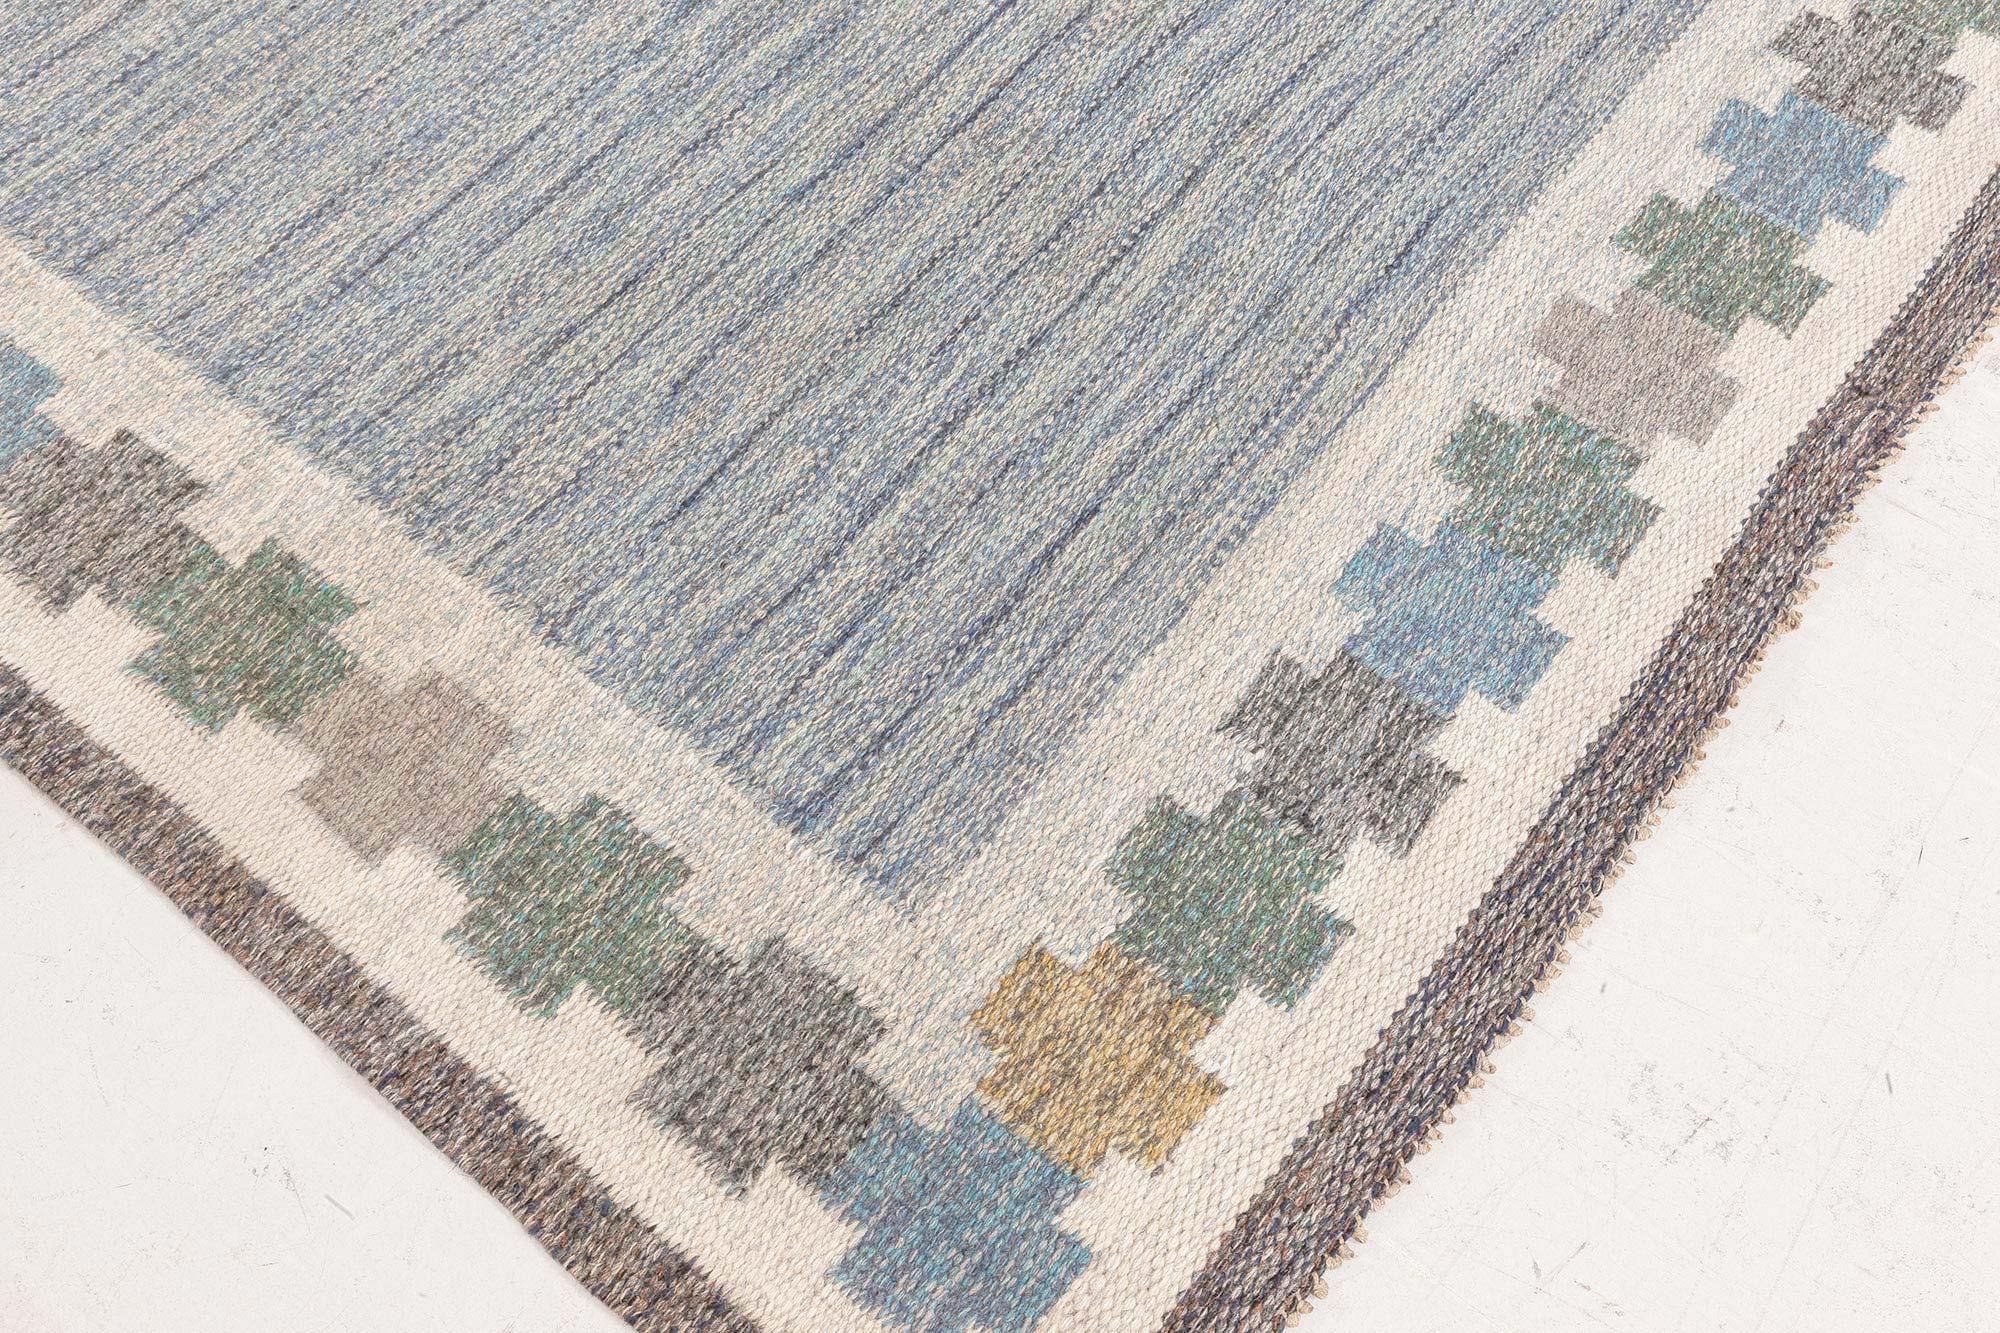 20th Century Vintage Swedish Flat Woven Rug by Ingegerd Silow For Sale